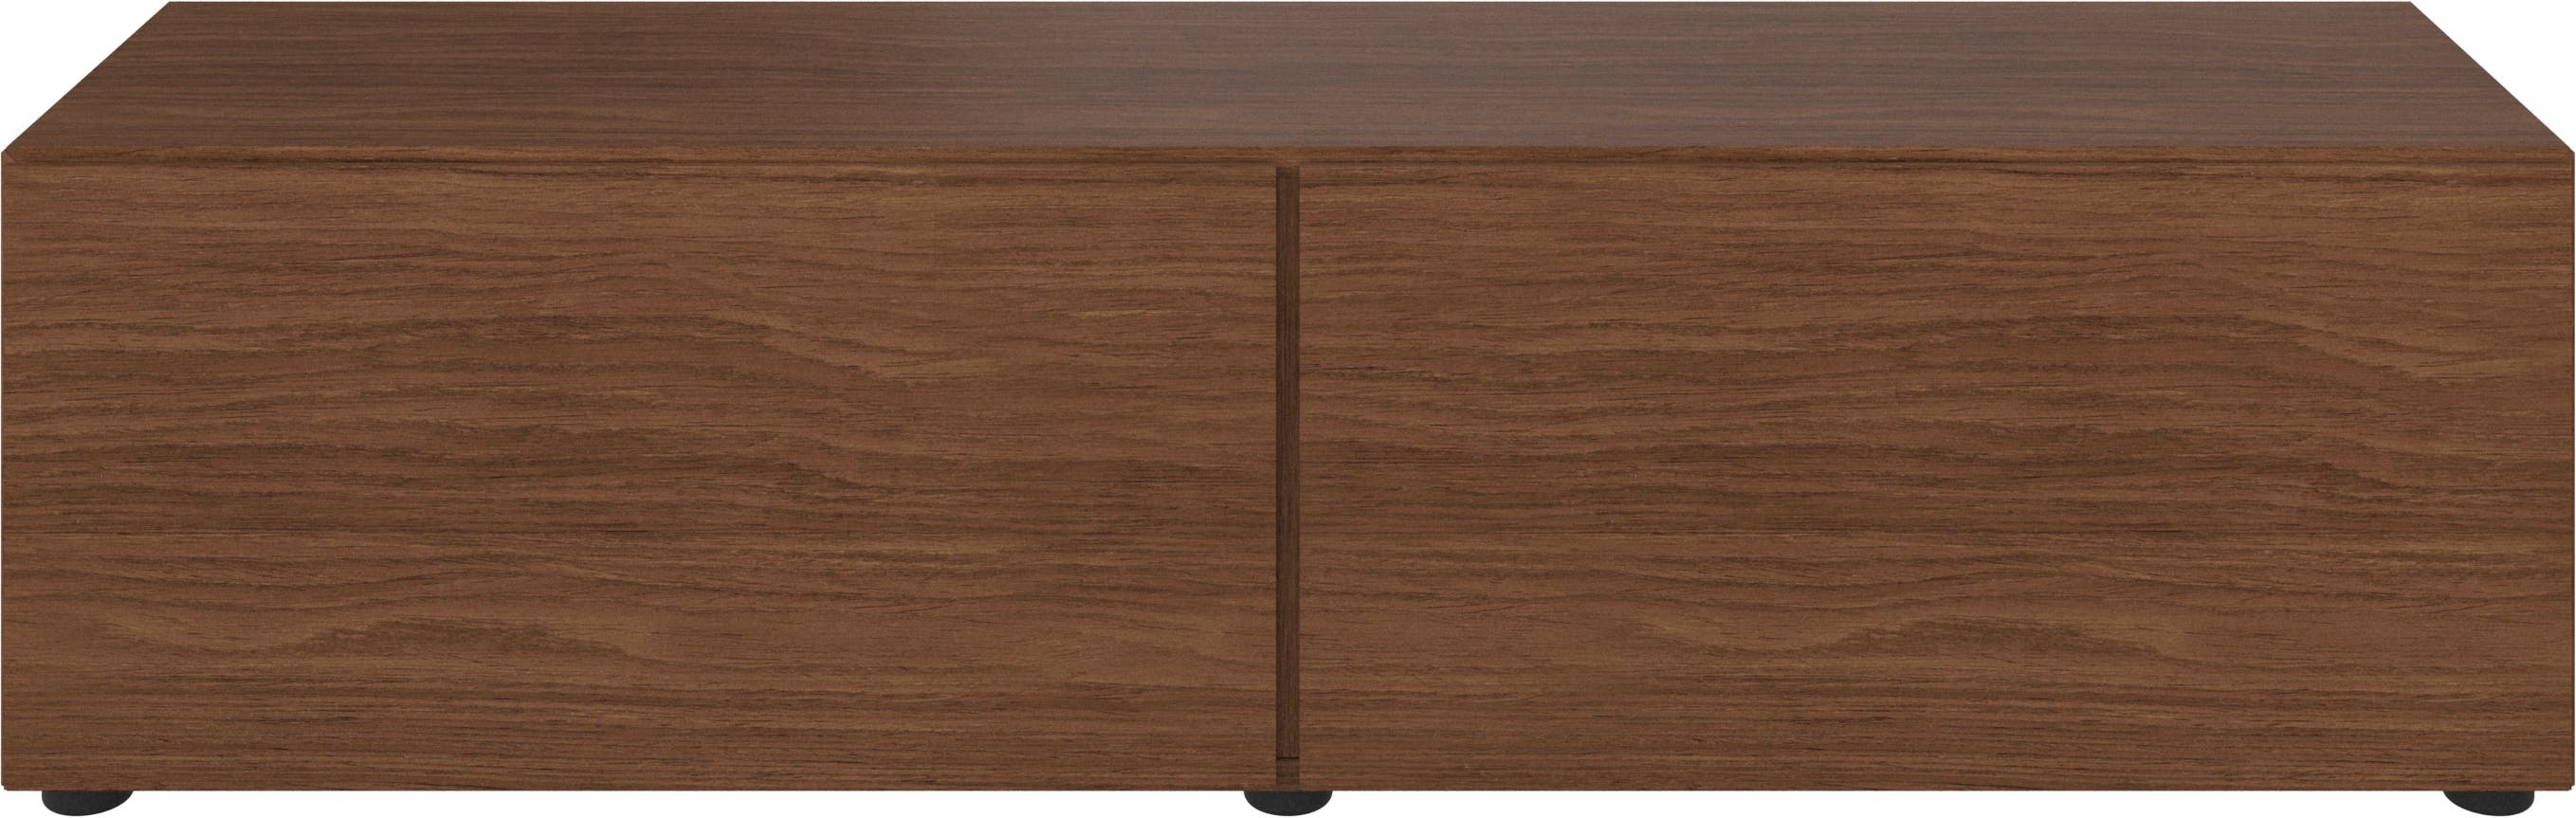 Lugano base cabinet with drop down doors